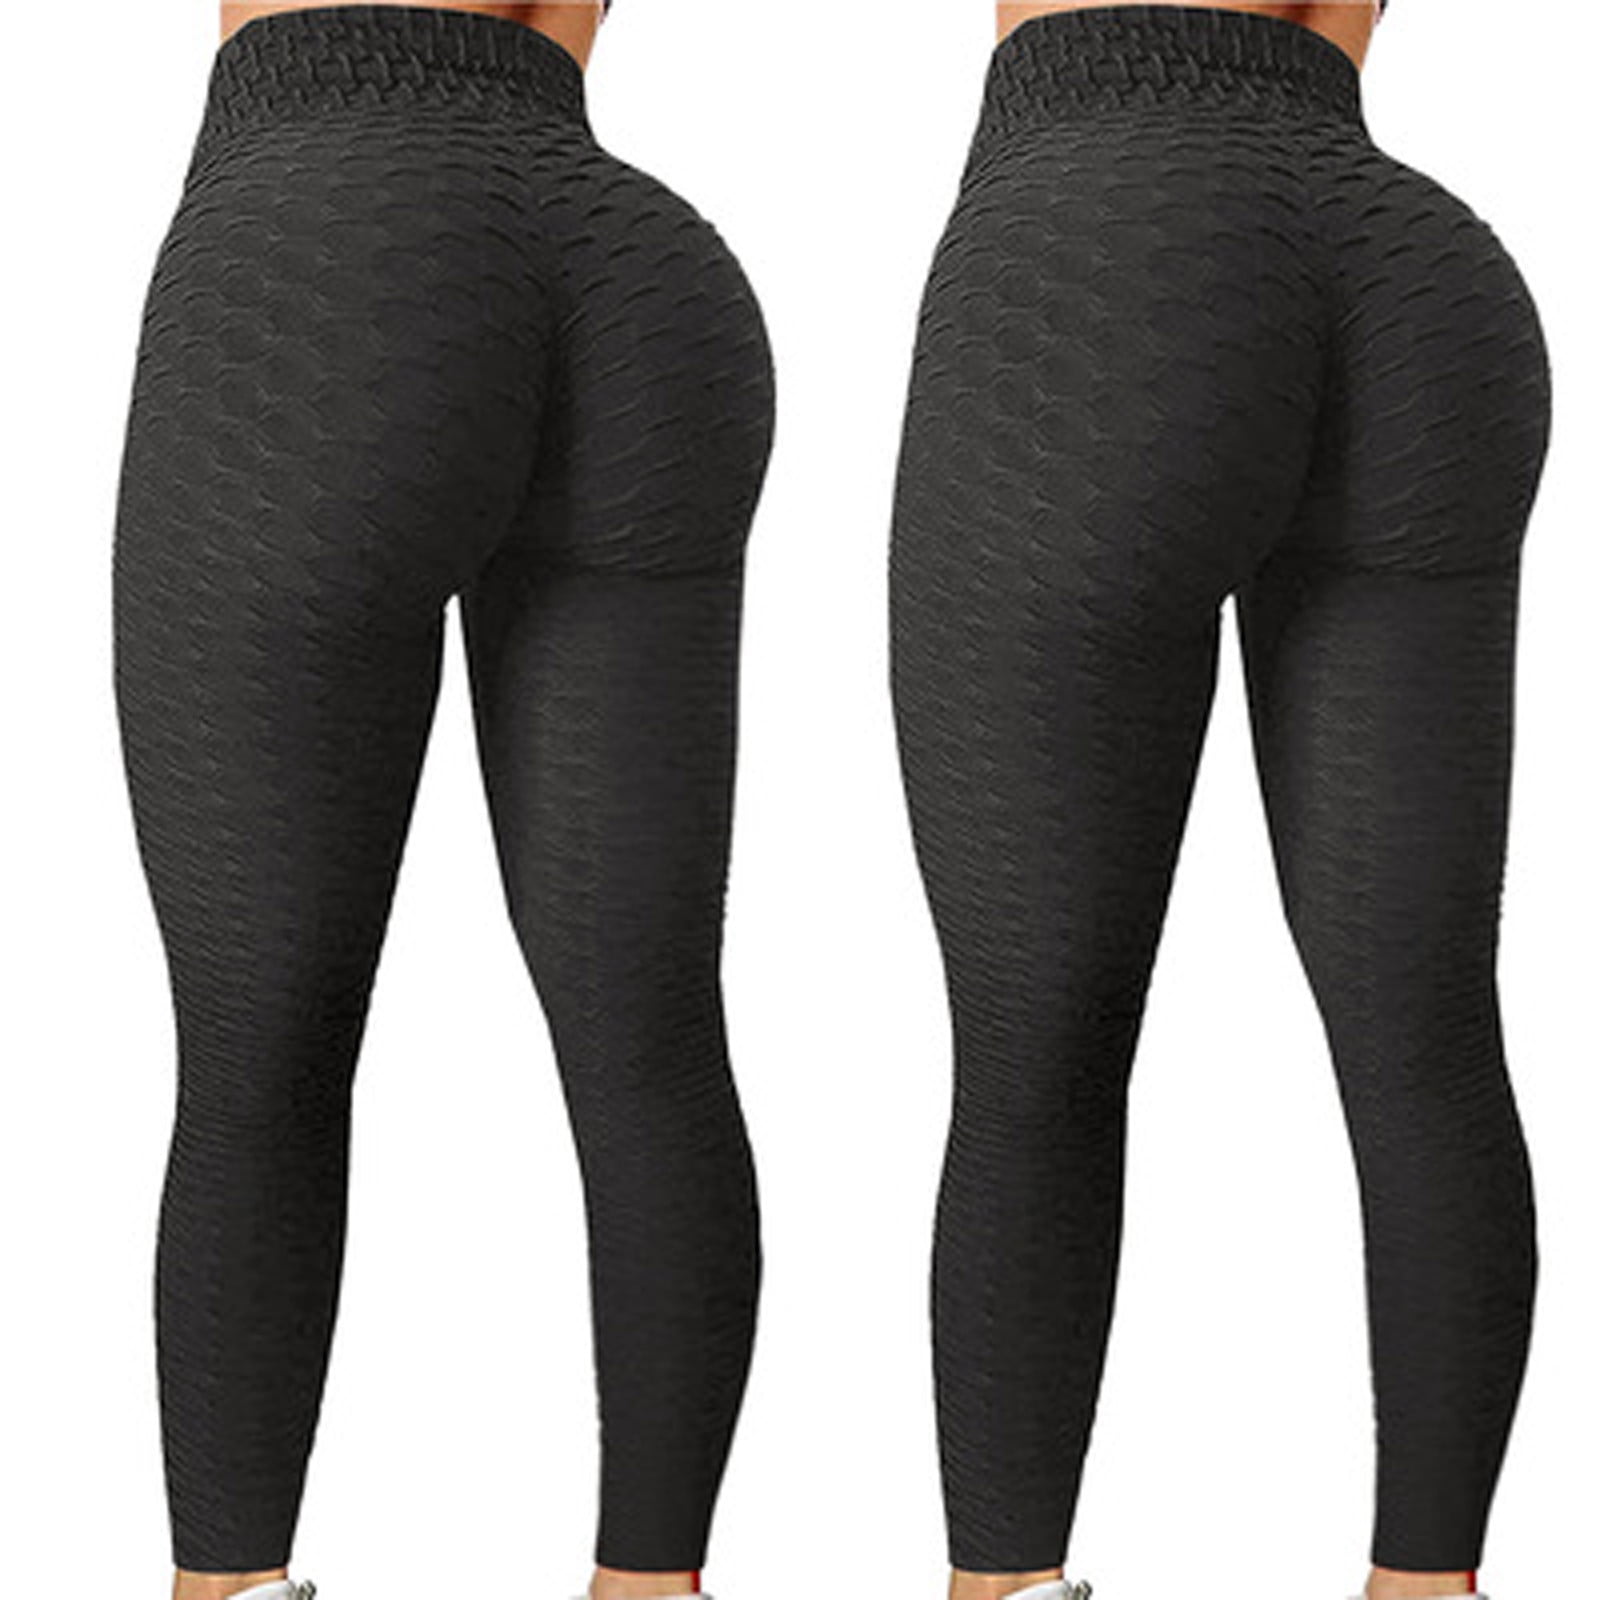 Pxiakgy yoga pants Exercise Color Yoga High Split Leisure Stretch Pants  Running Solid Women's Pants Grey + XXL 